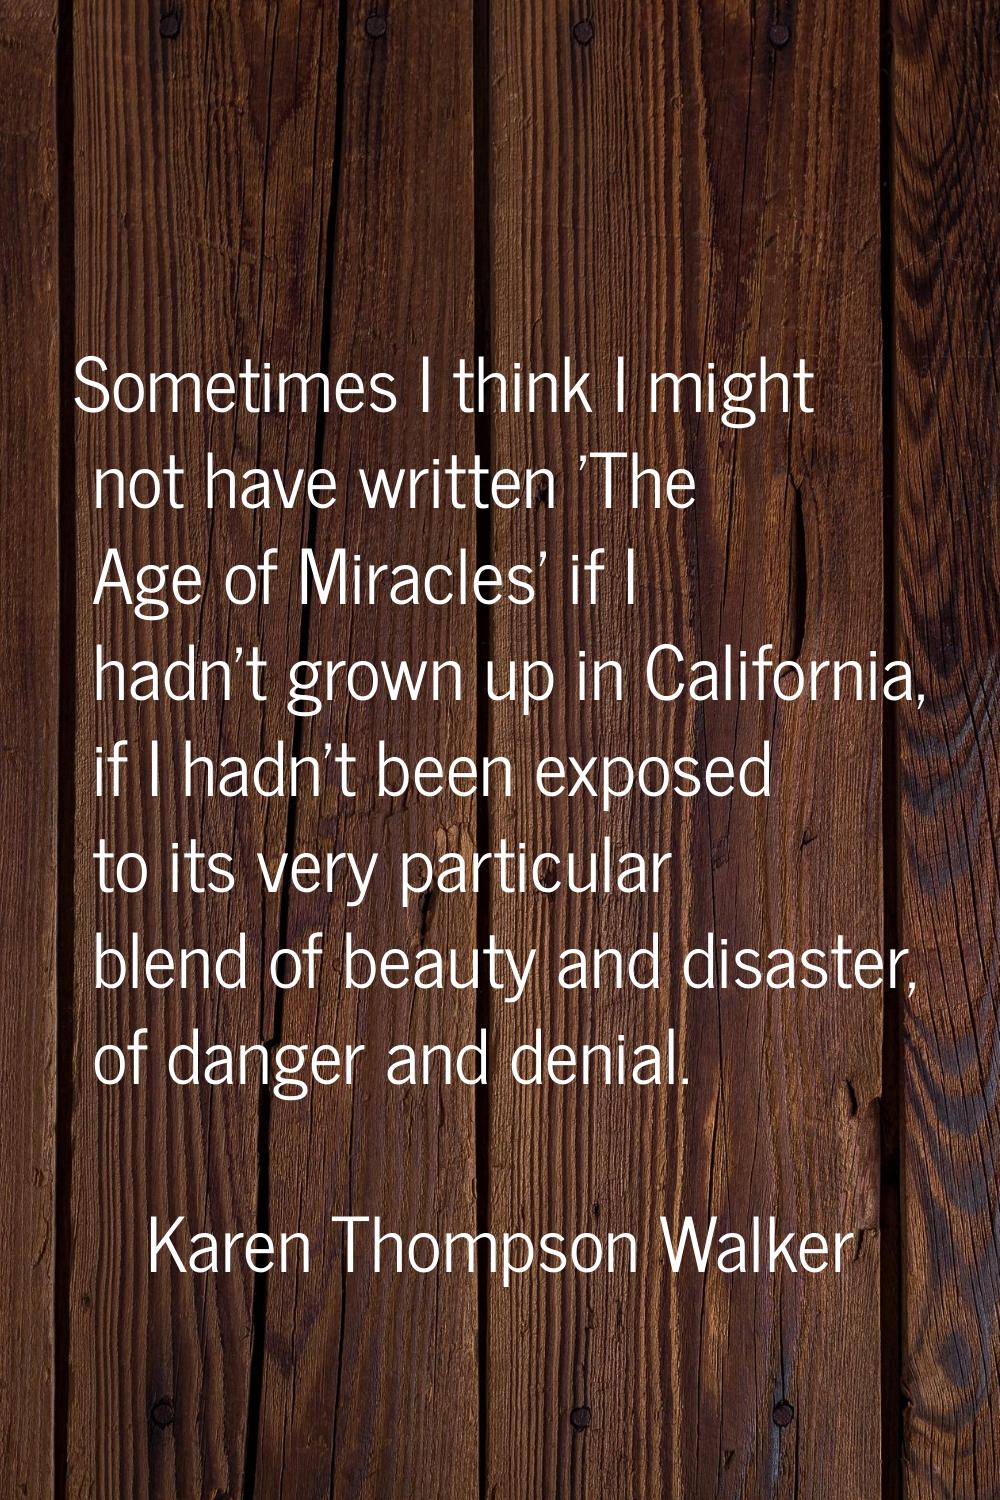 Sometimes I think I might not have written 'The Age of Miracles' if I hadn't grown up in California